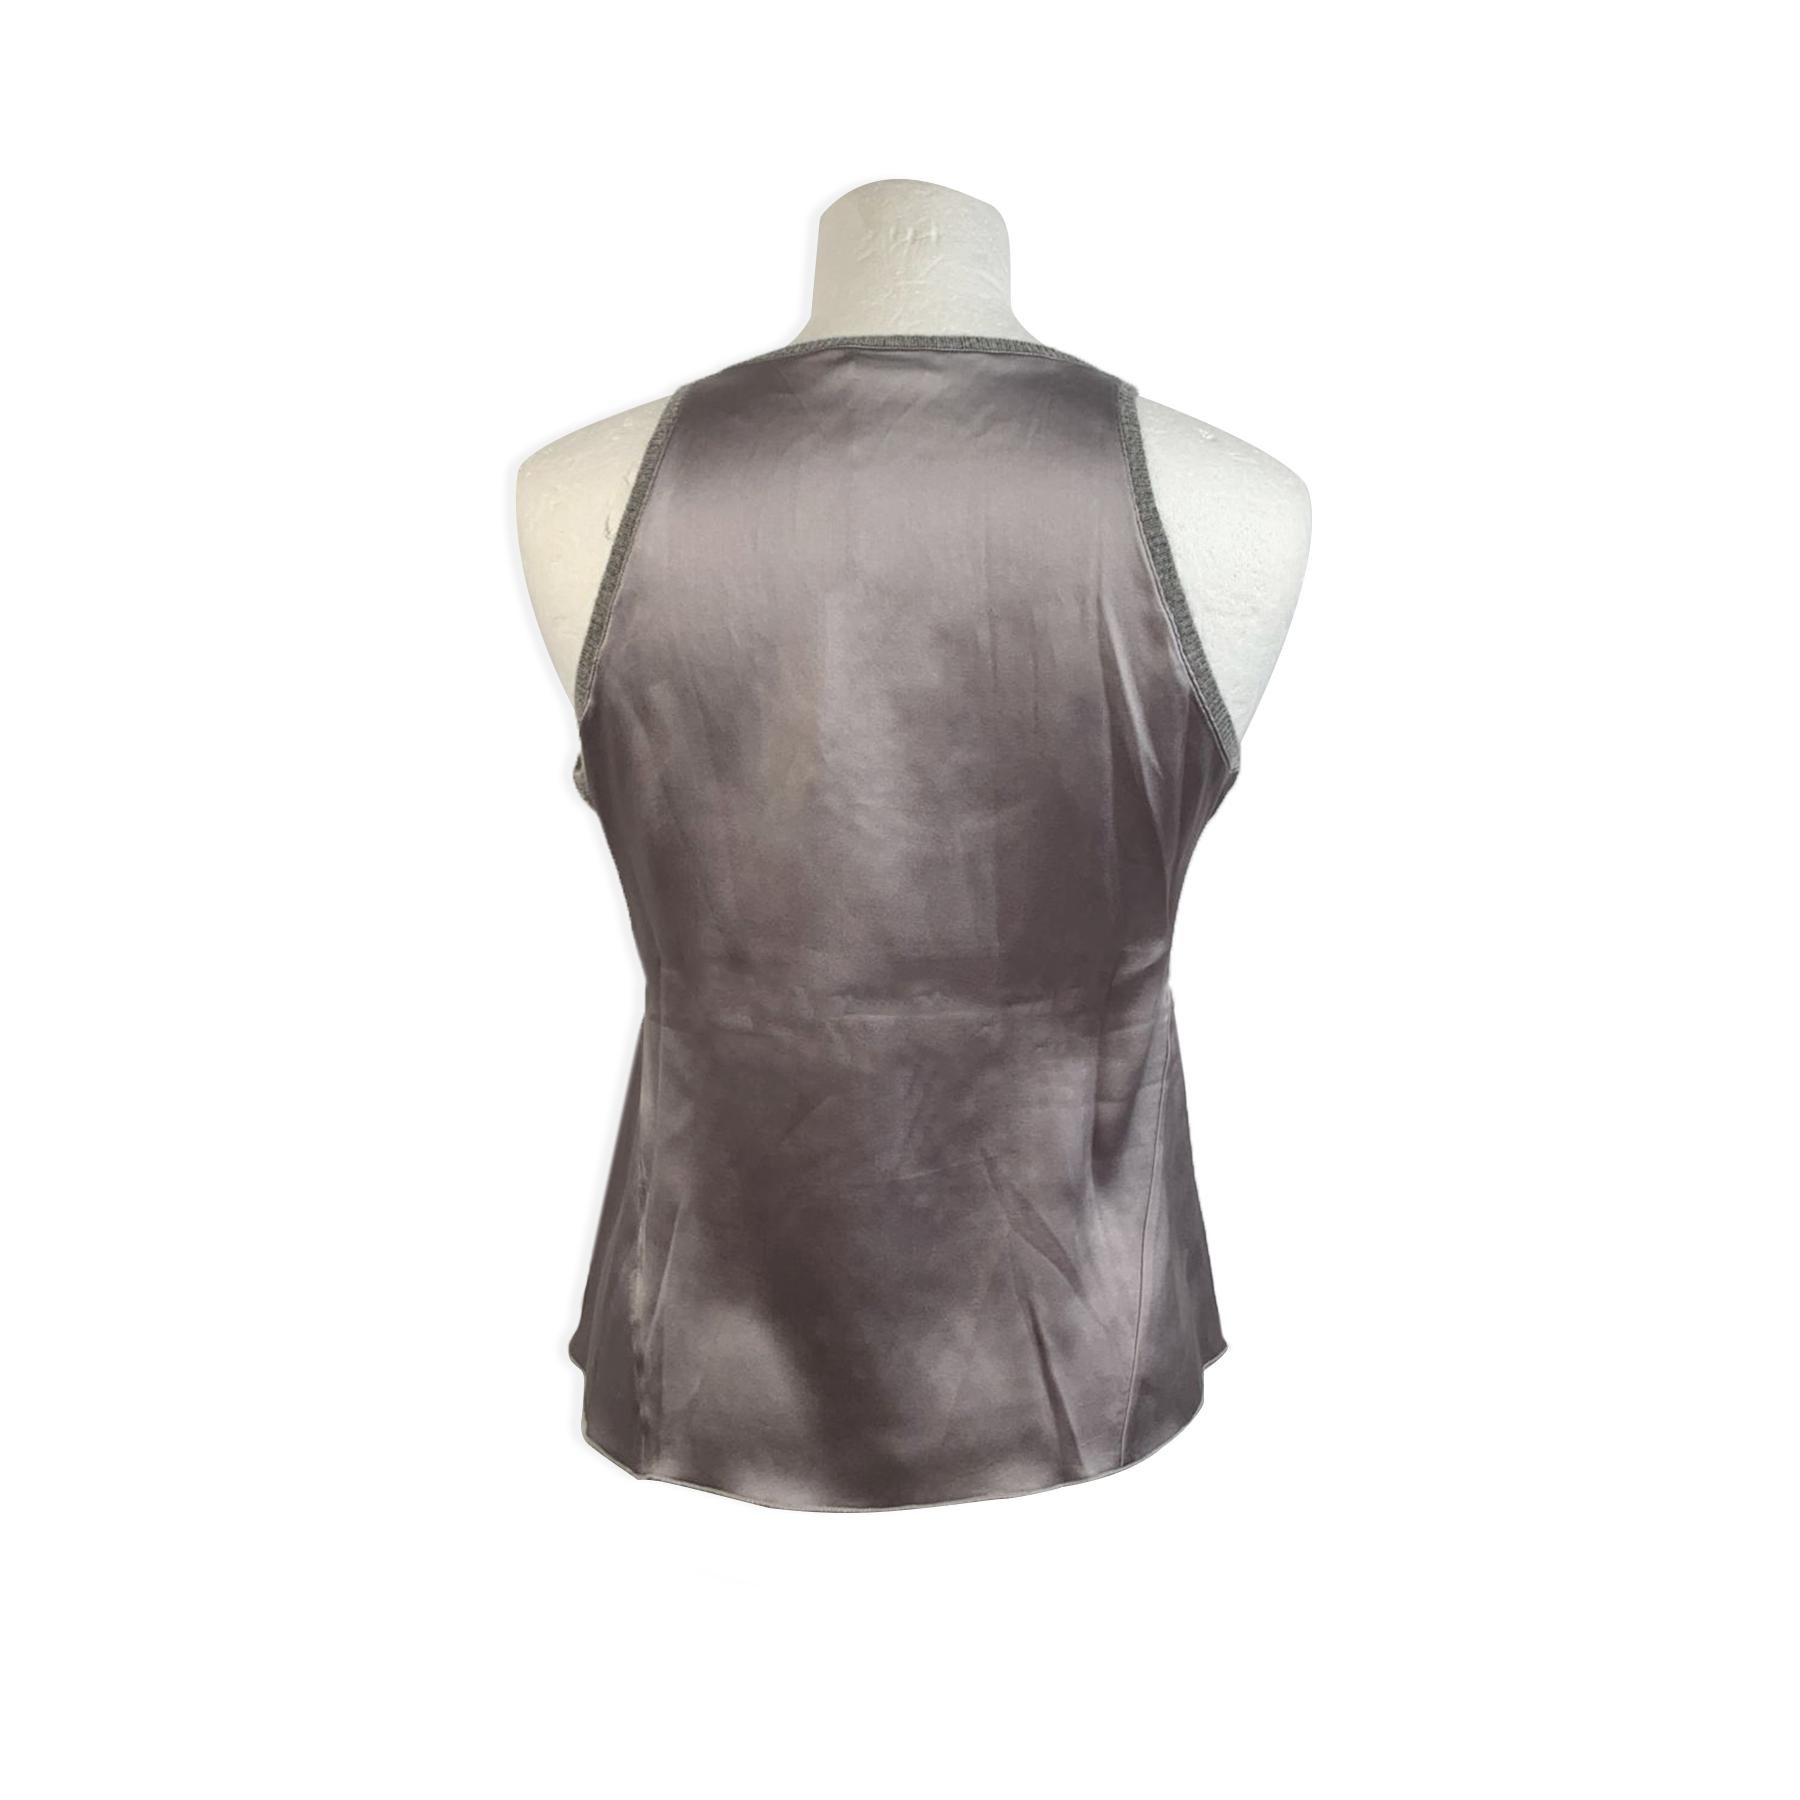 Brunello Cucinelli gray silk tank top. It features a sleeveless styling, a cashmere trim, and a scoop neckline. Composition: 100% Silk, 100% Cashmere. Made in Italy. Size: SMALL.



Details

MATERIAL: Silk

COLOR: Gray

MODEL: Sleeveless